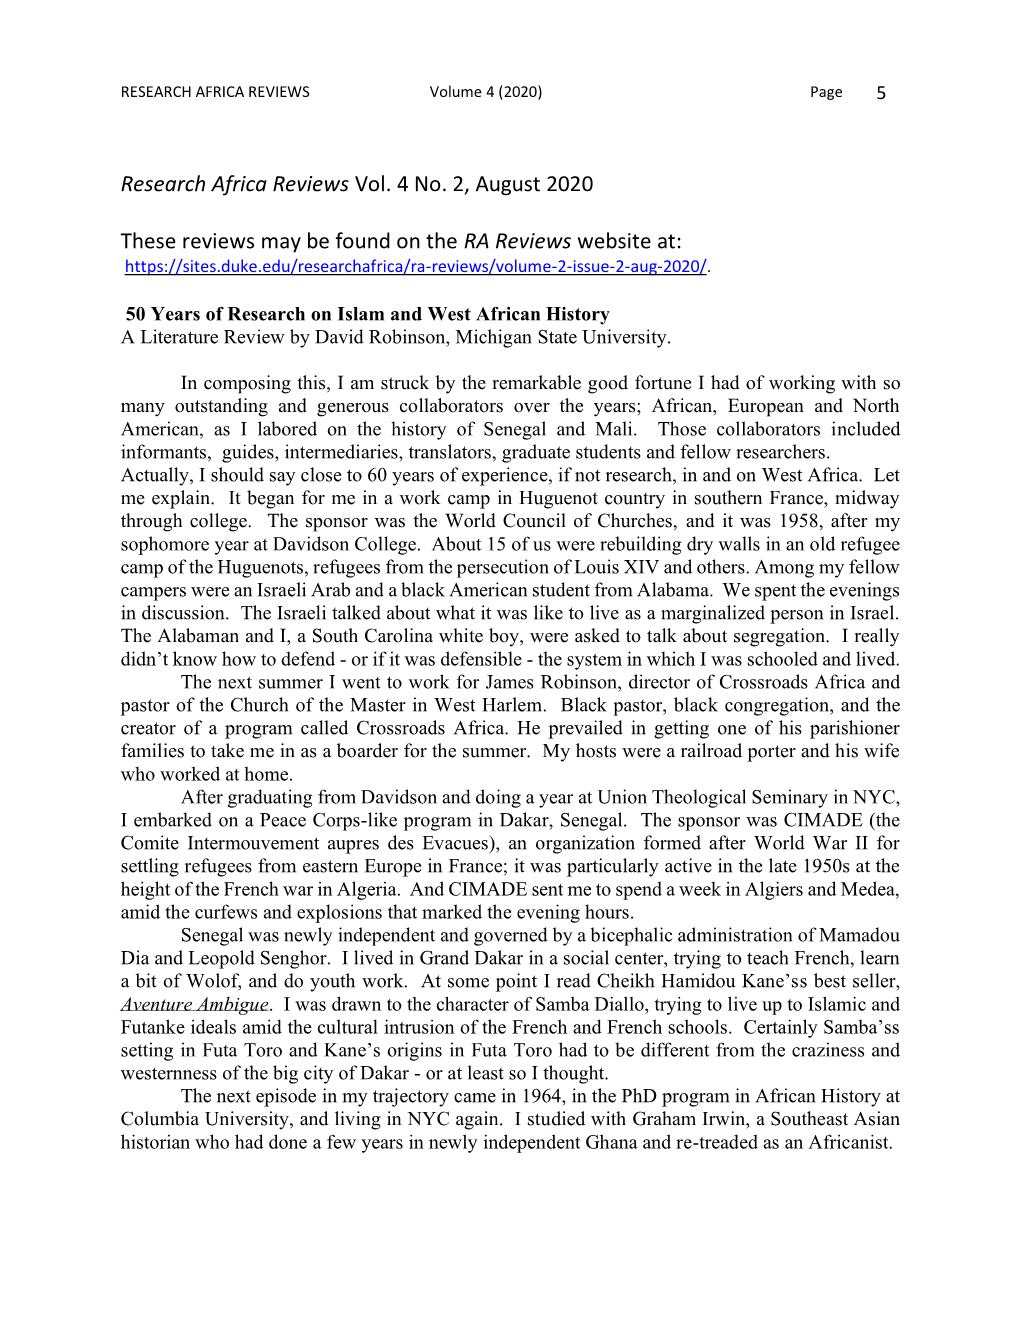 50 Years of Research on Islam and West African History a Literature Review by David Robinson, Michigan State University